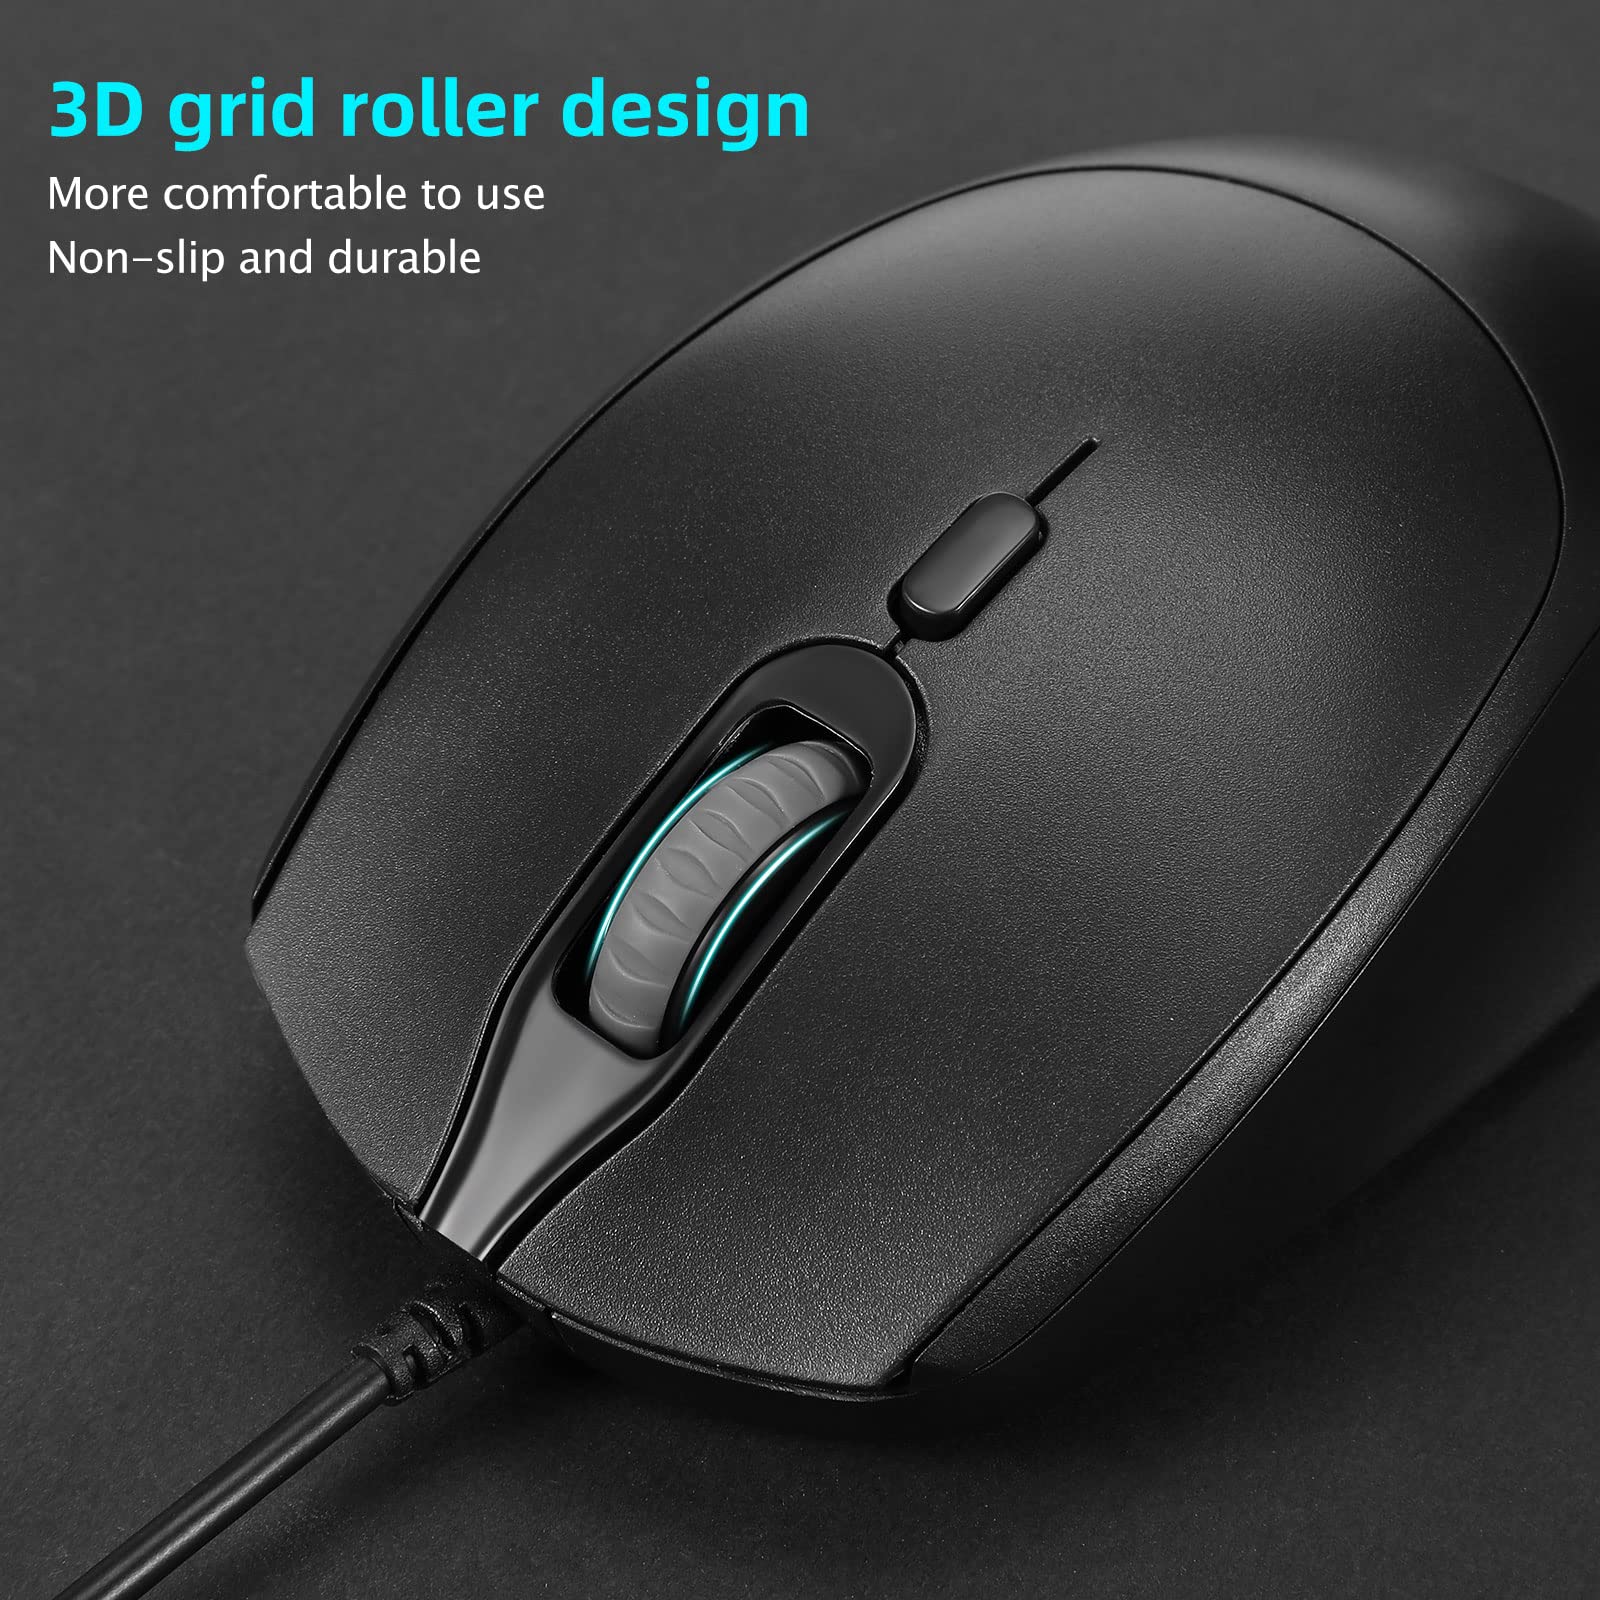 16 Pack Computer Mouse Pack Bulk Wired Silent USB Optical Corded Mouse with 3 Adjustable DPI Computer Mice Compatible with PC Laptop Desktop School Office Business Home Supplies